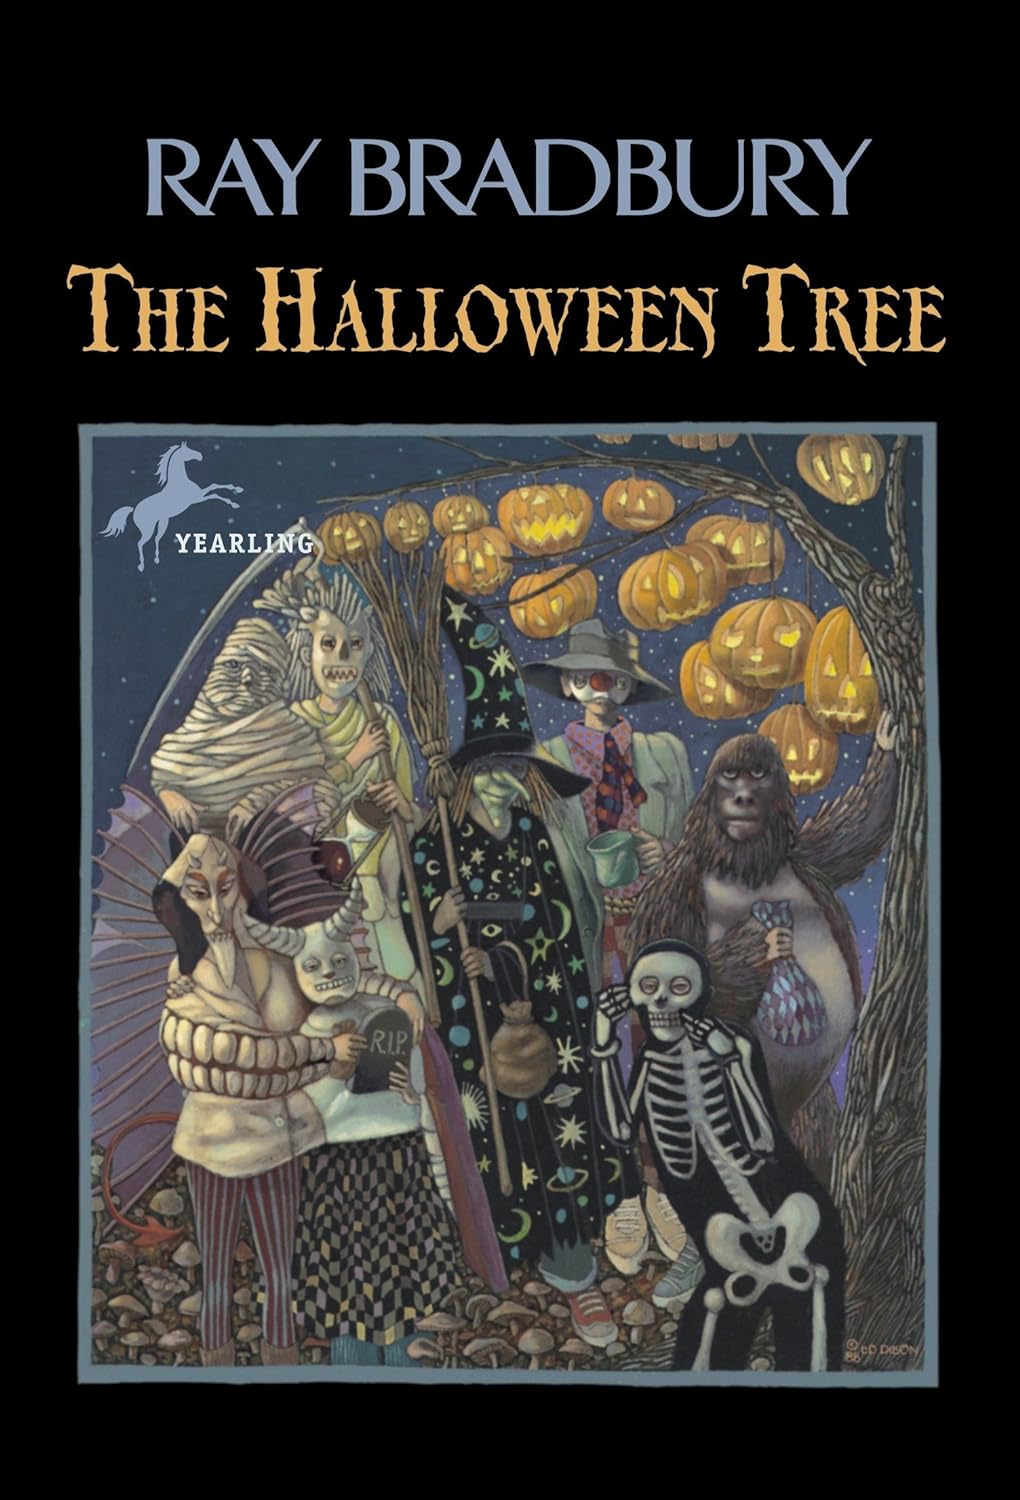 cover art for The Halloween Tree, featuring a mishmash of spooky images